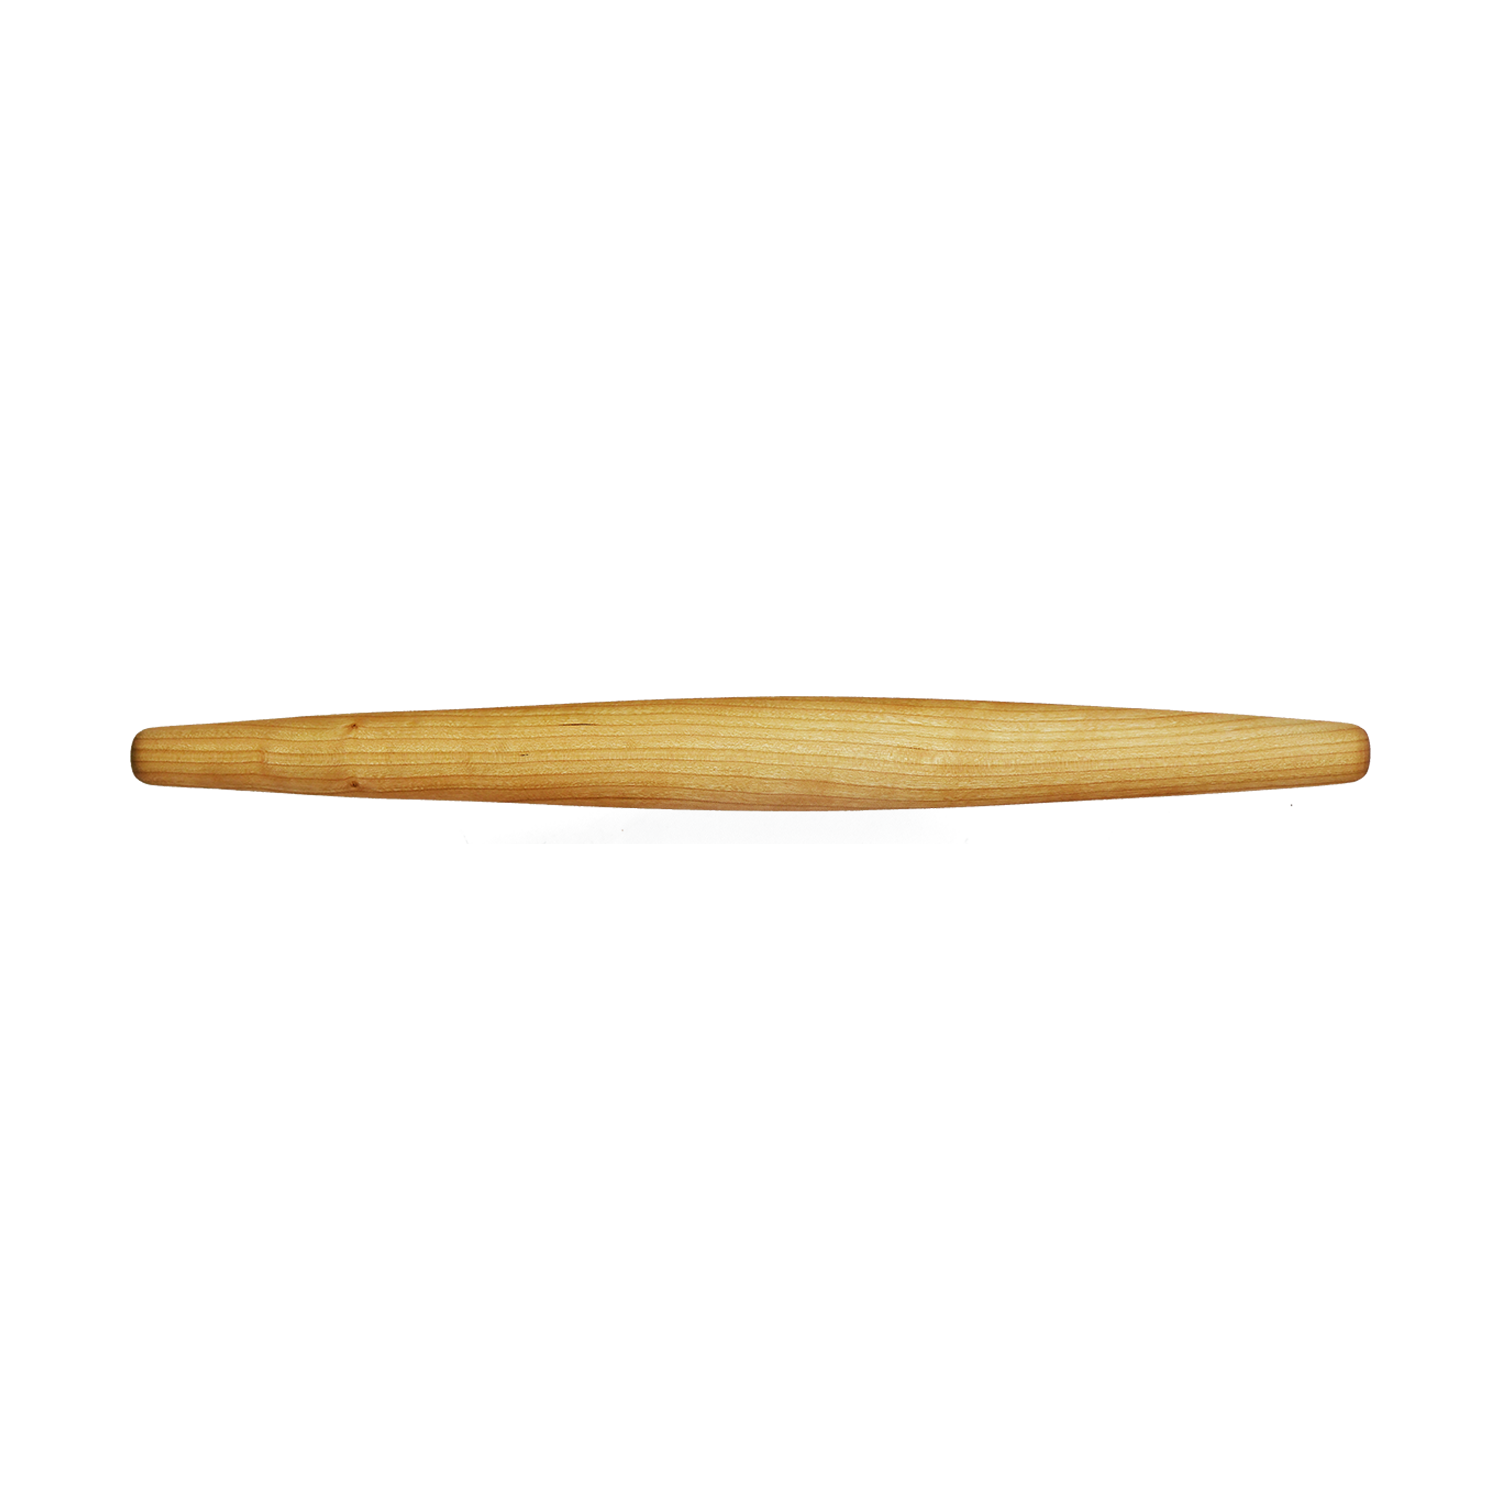 Hand-Turned Cherry French Tapered Rolling Pin